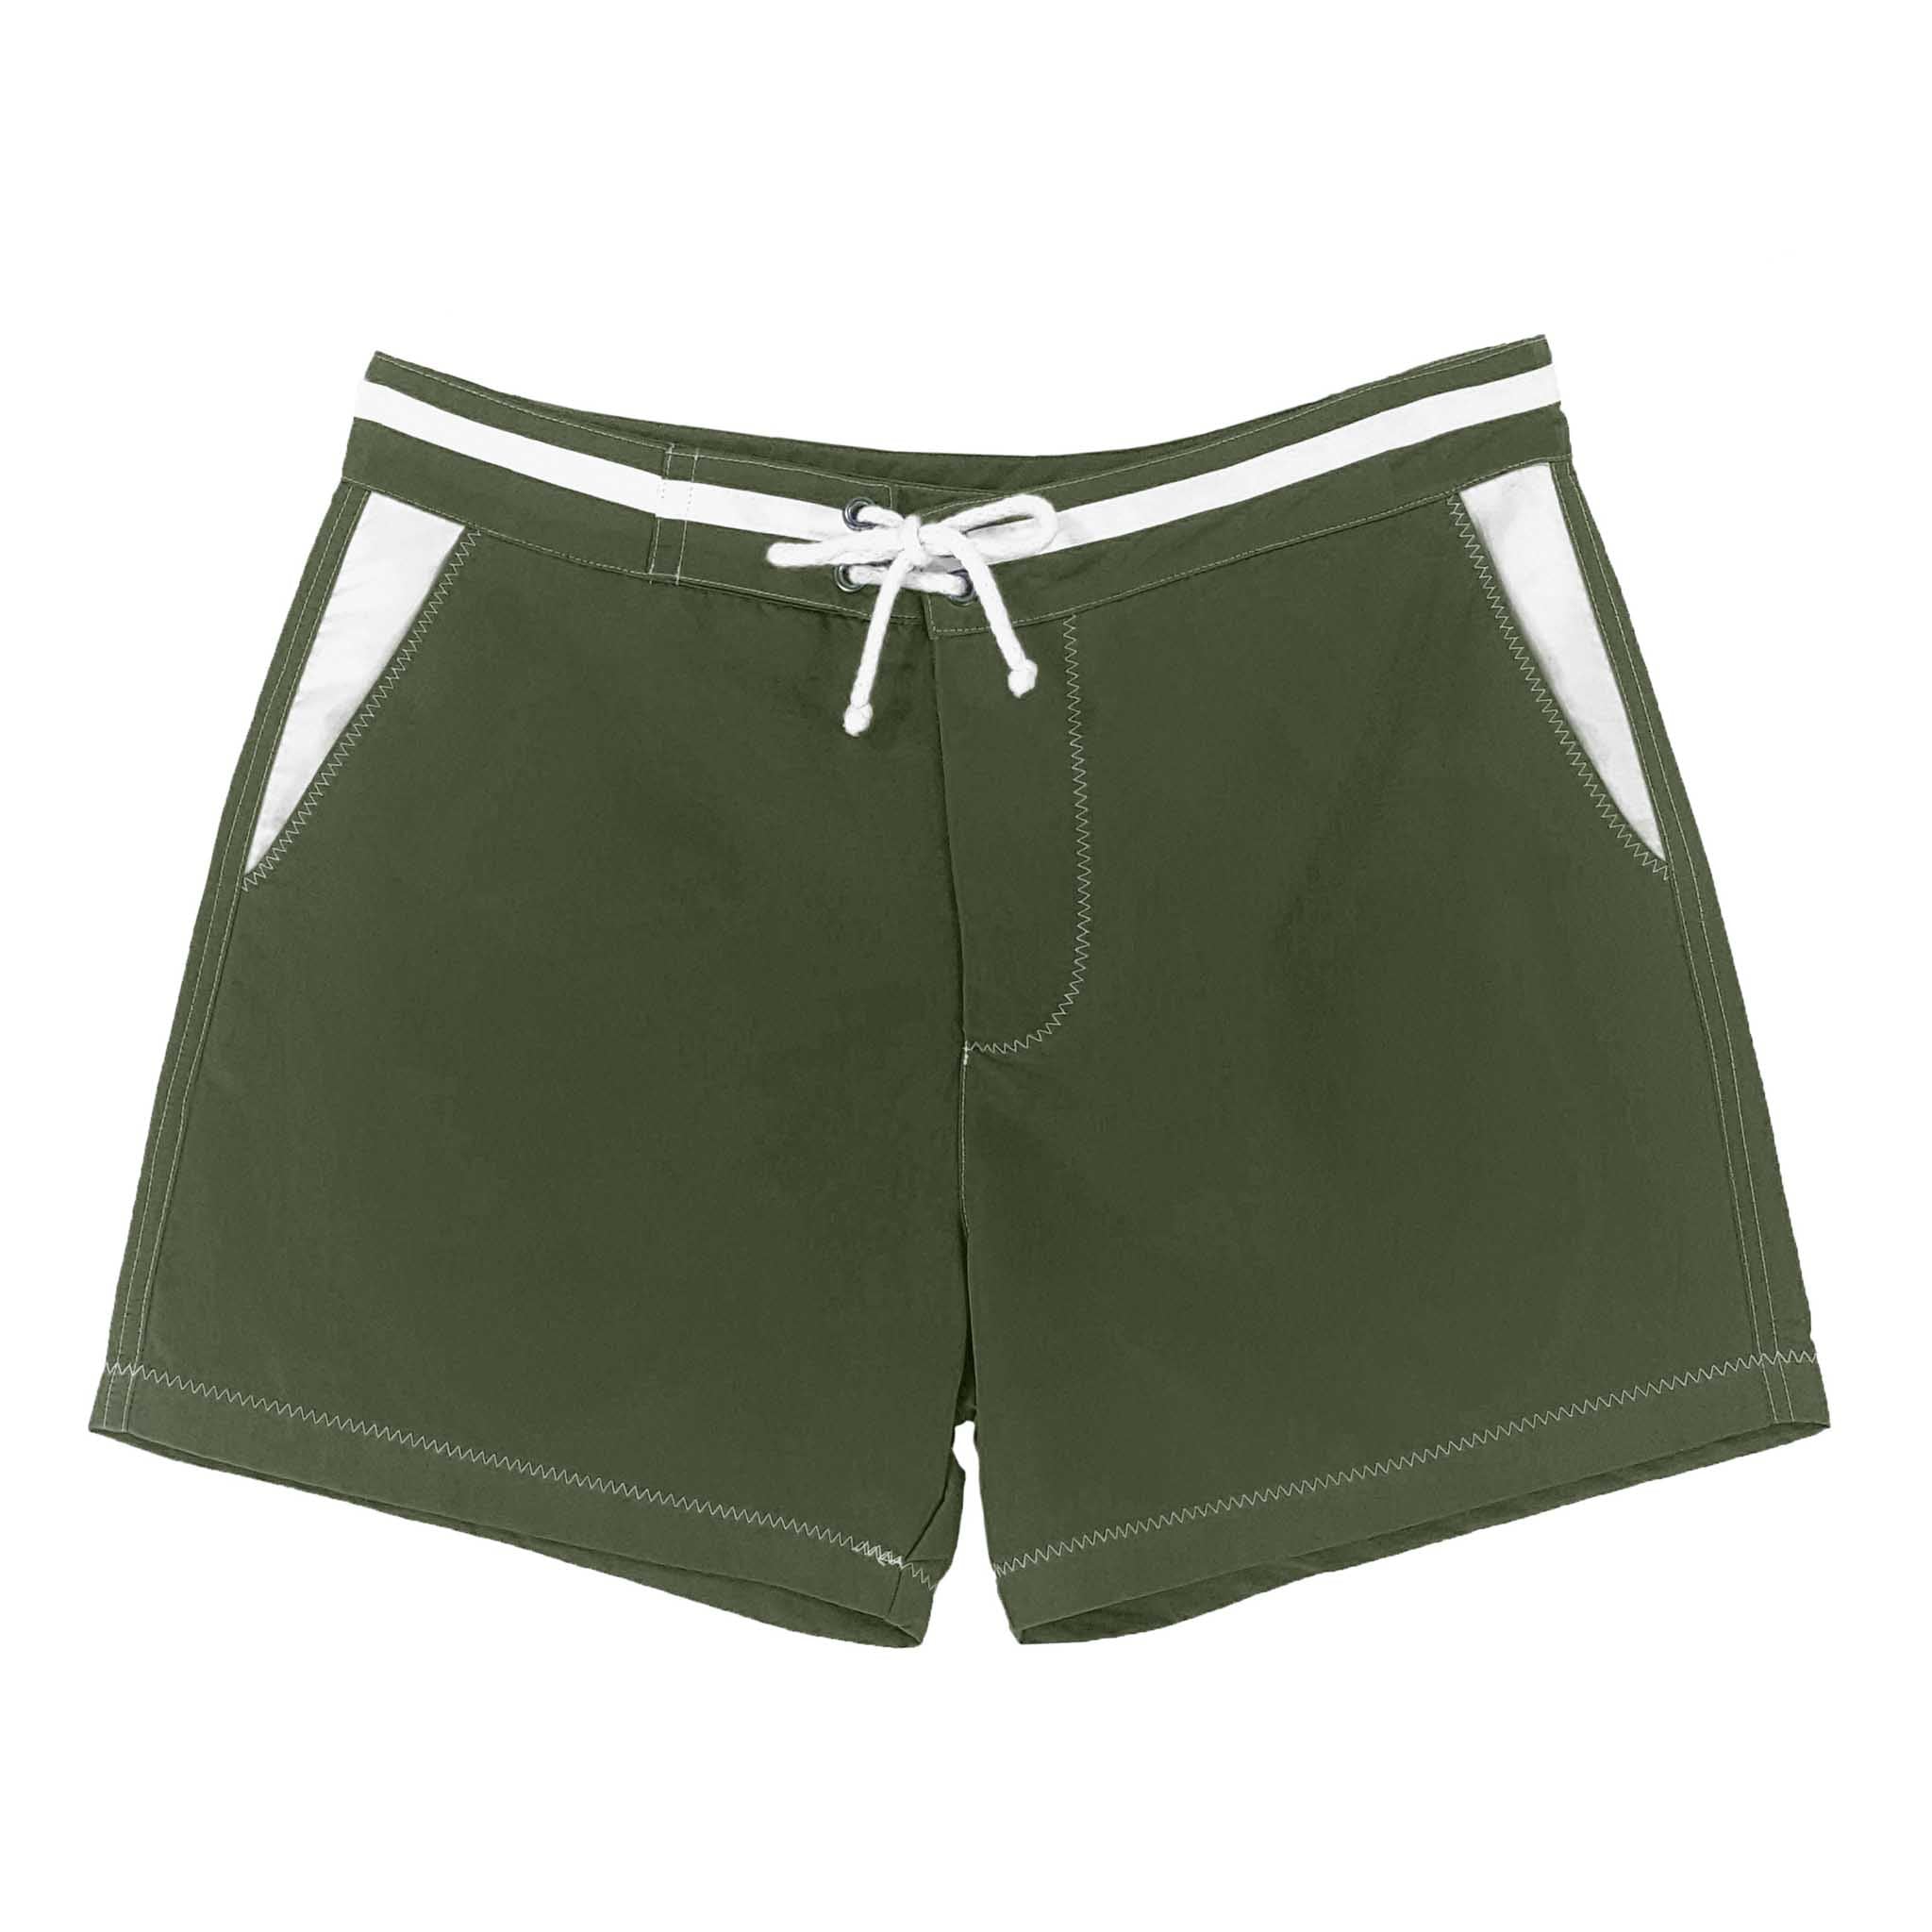 Dark green swimming trunks made from recycled polyester from Bluebuck